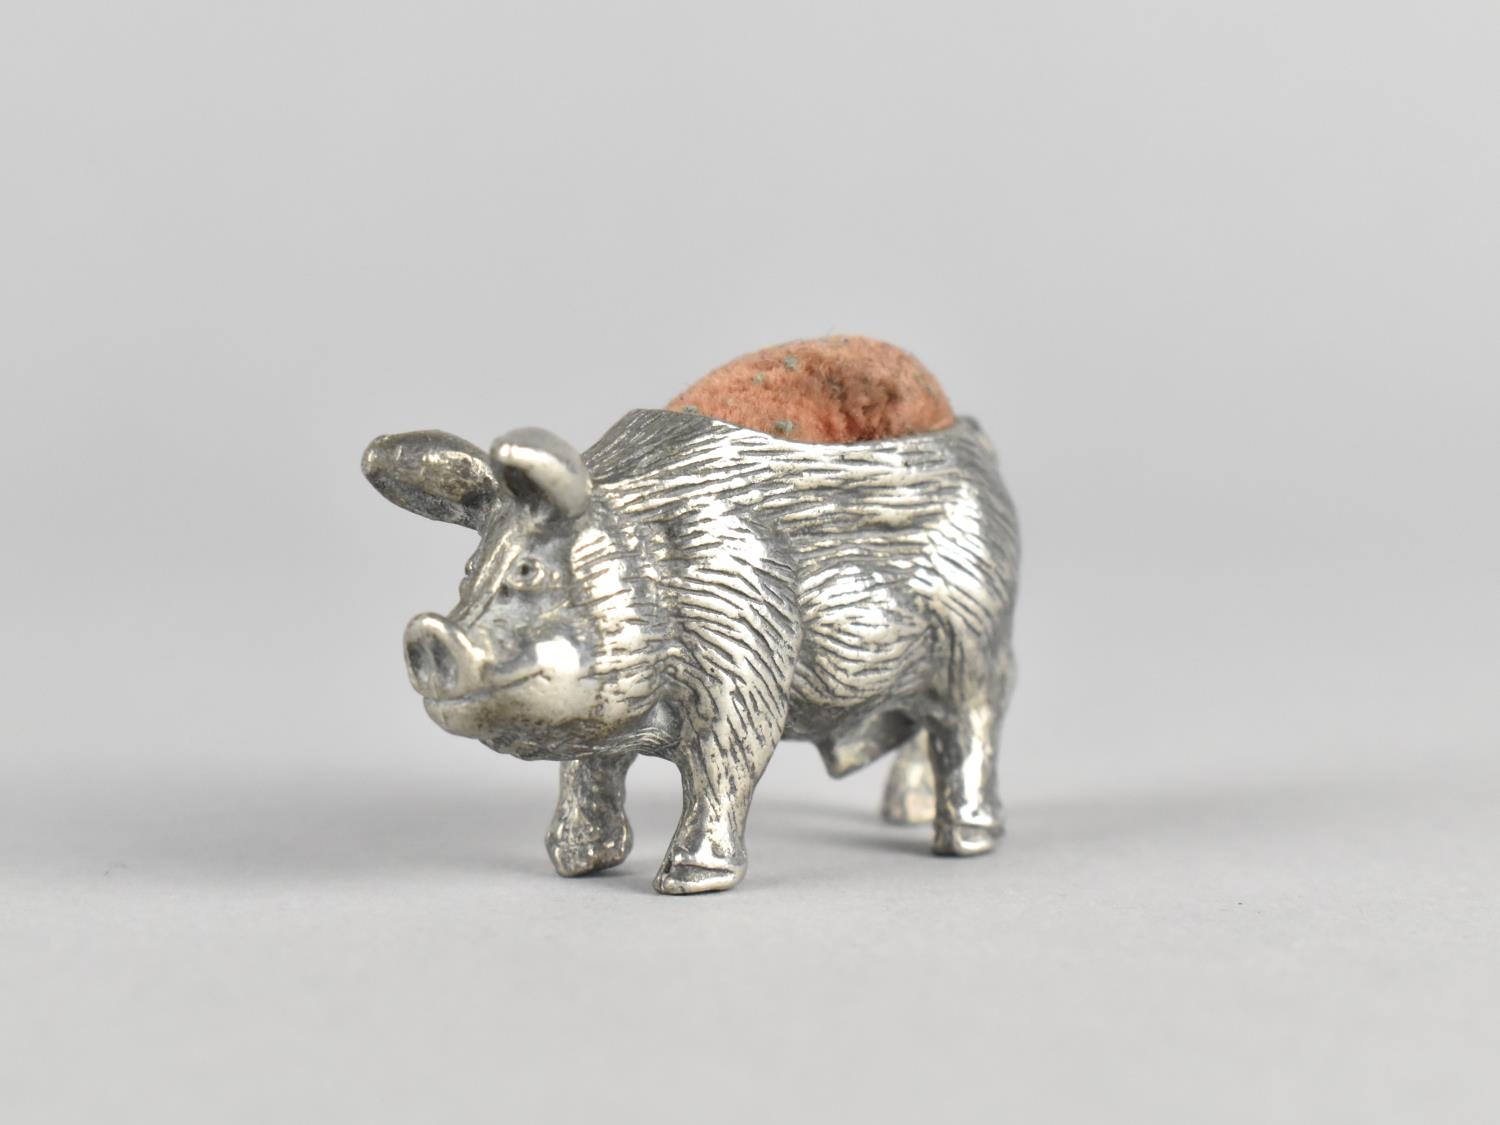 A Small Metal Pincushion Modelled as a Boar, 4cms Long, 2.5cms High - Image 4 of 5